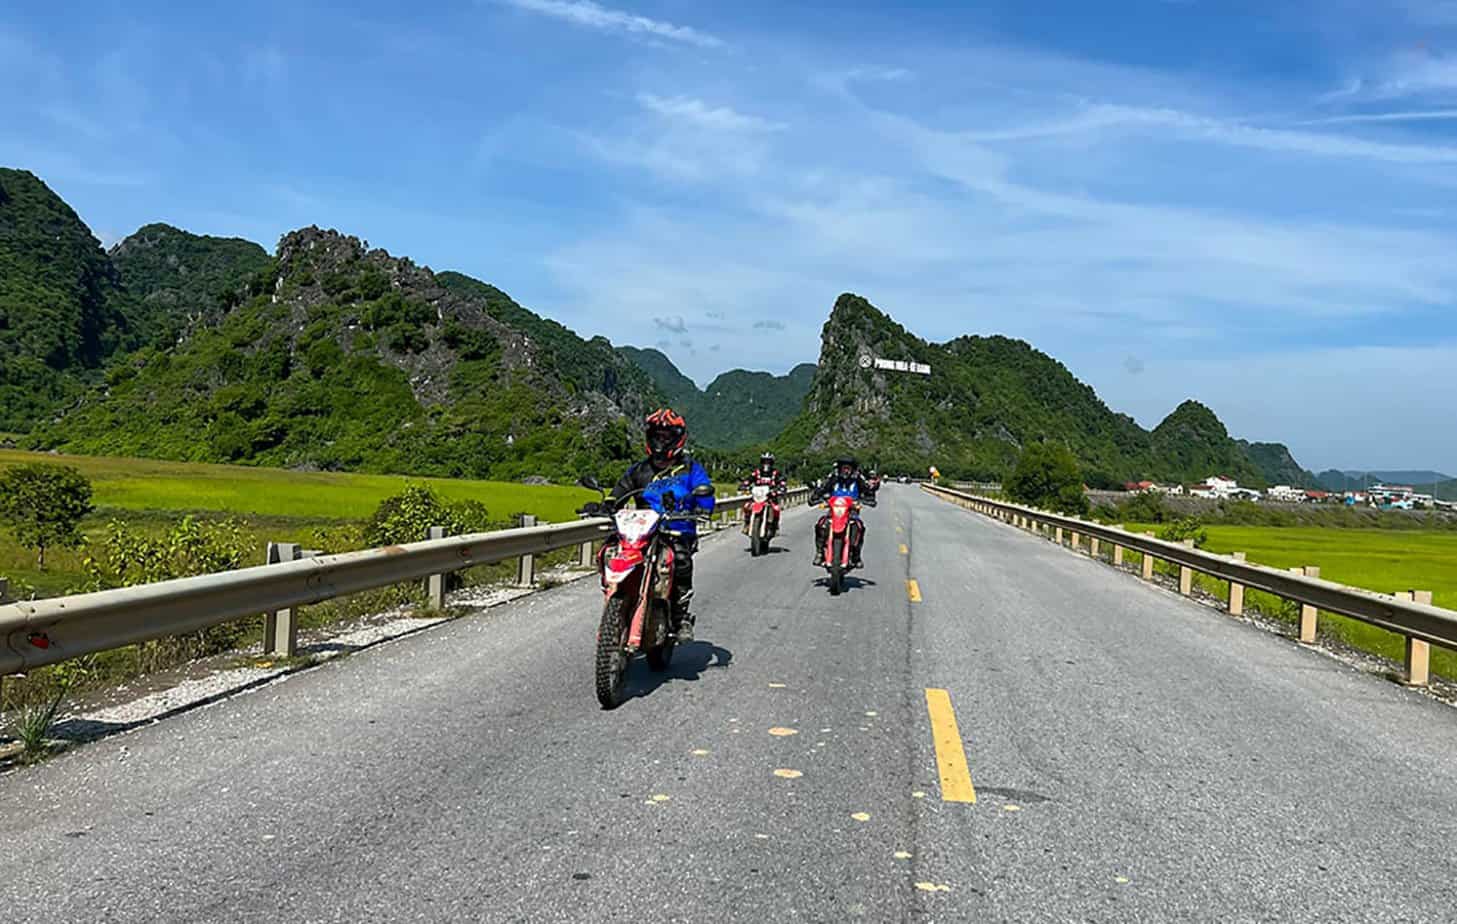 Motorbike routes in Vietnam - the Ho Chi Minh trail